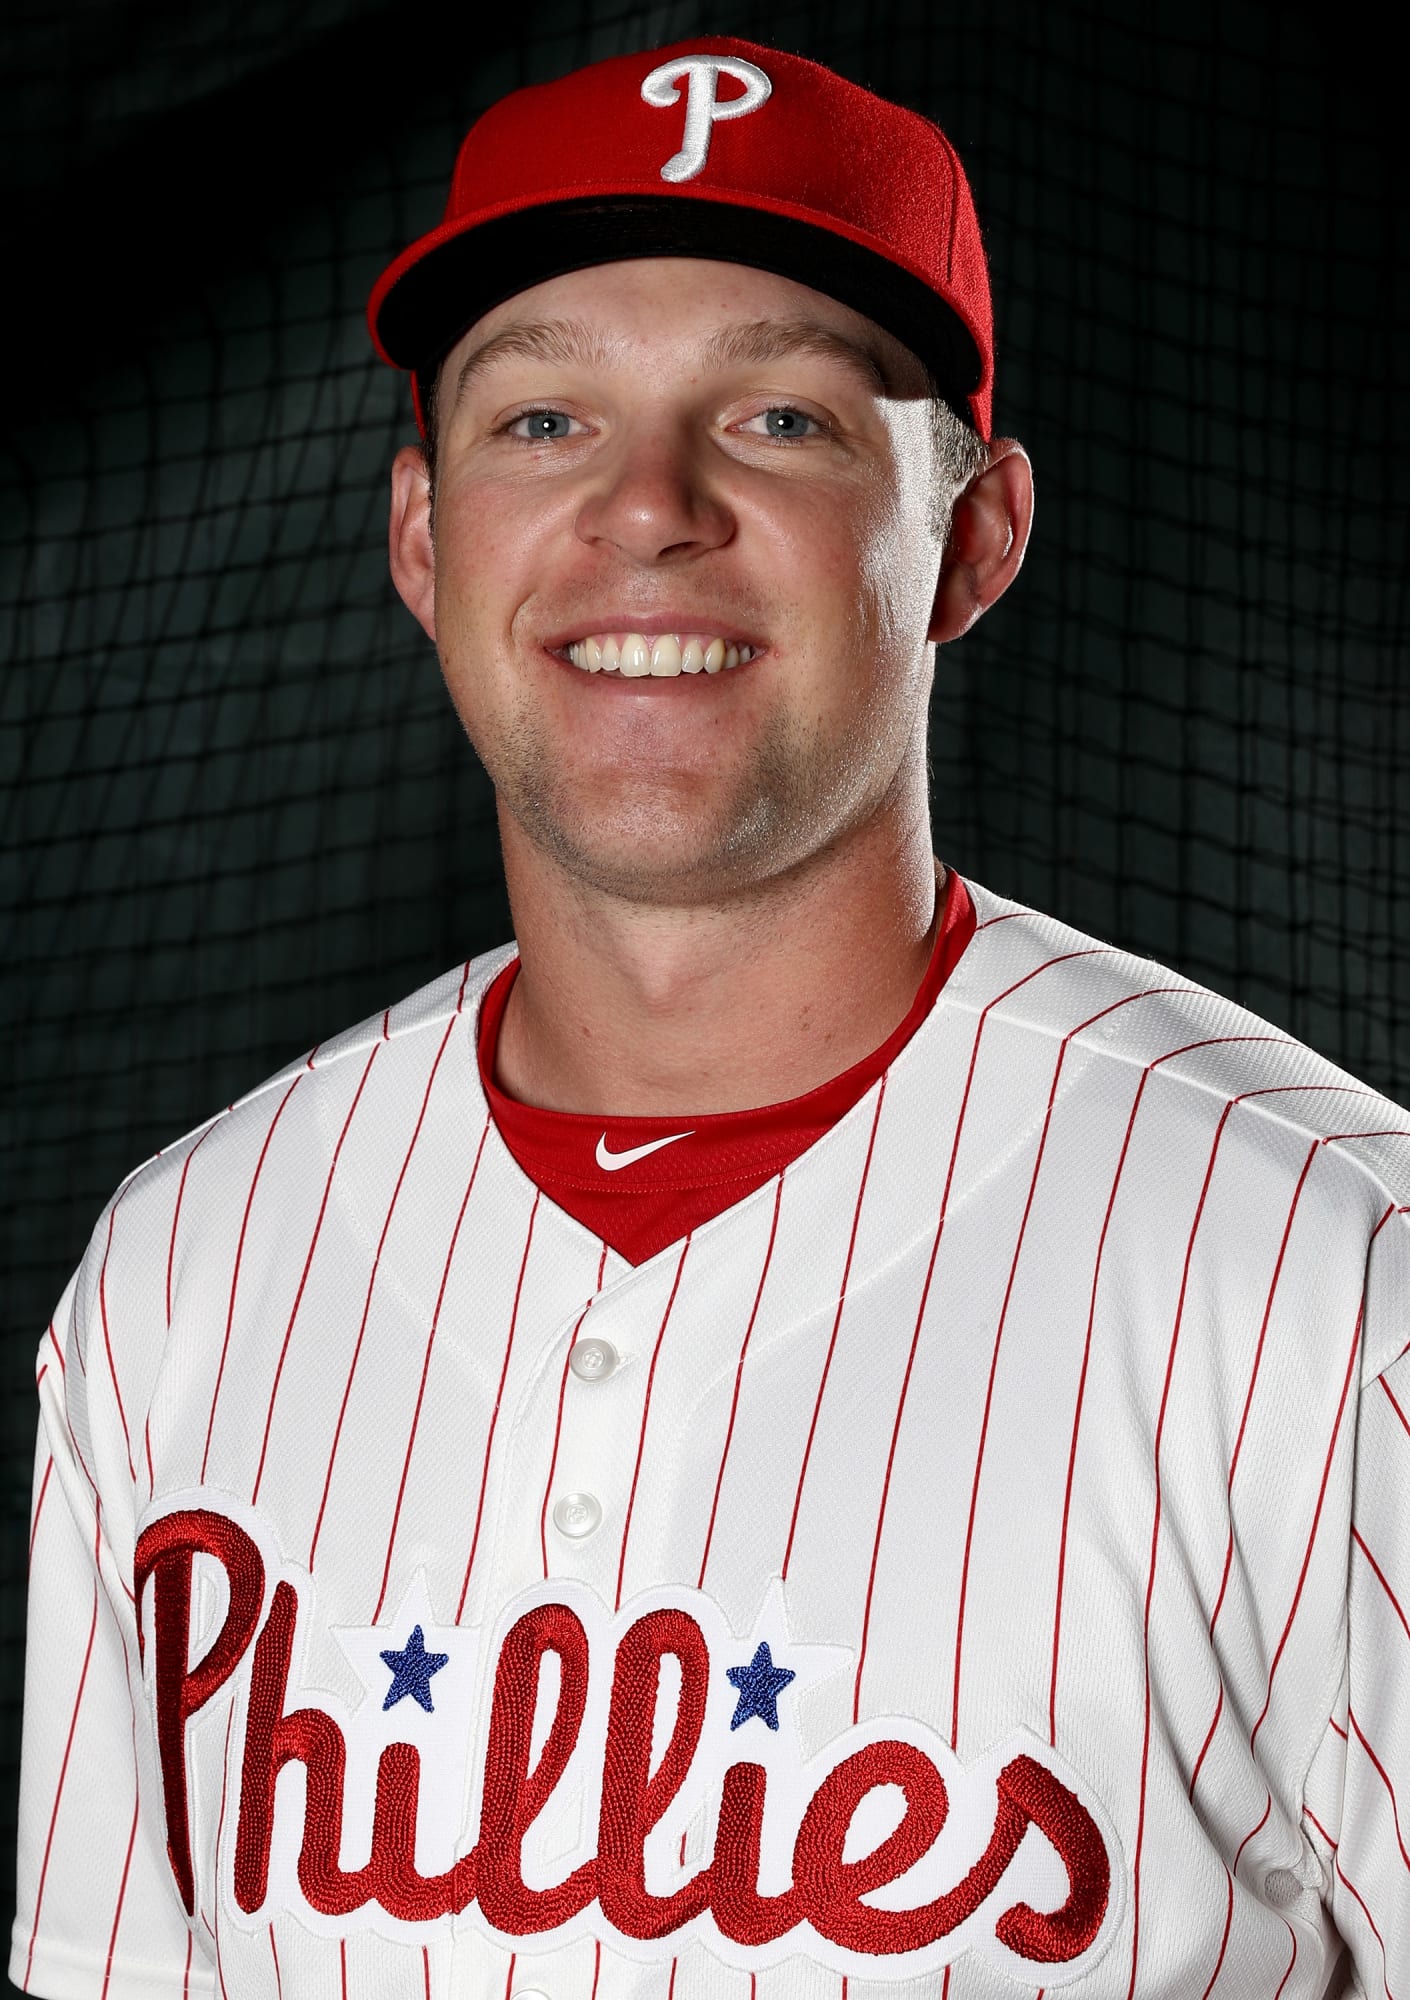 Phillies callup top hitting prospect OF/1B Rhys Hoskins